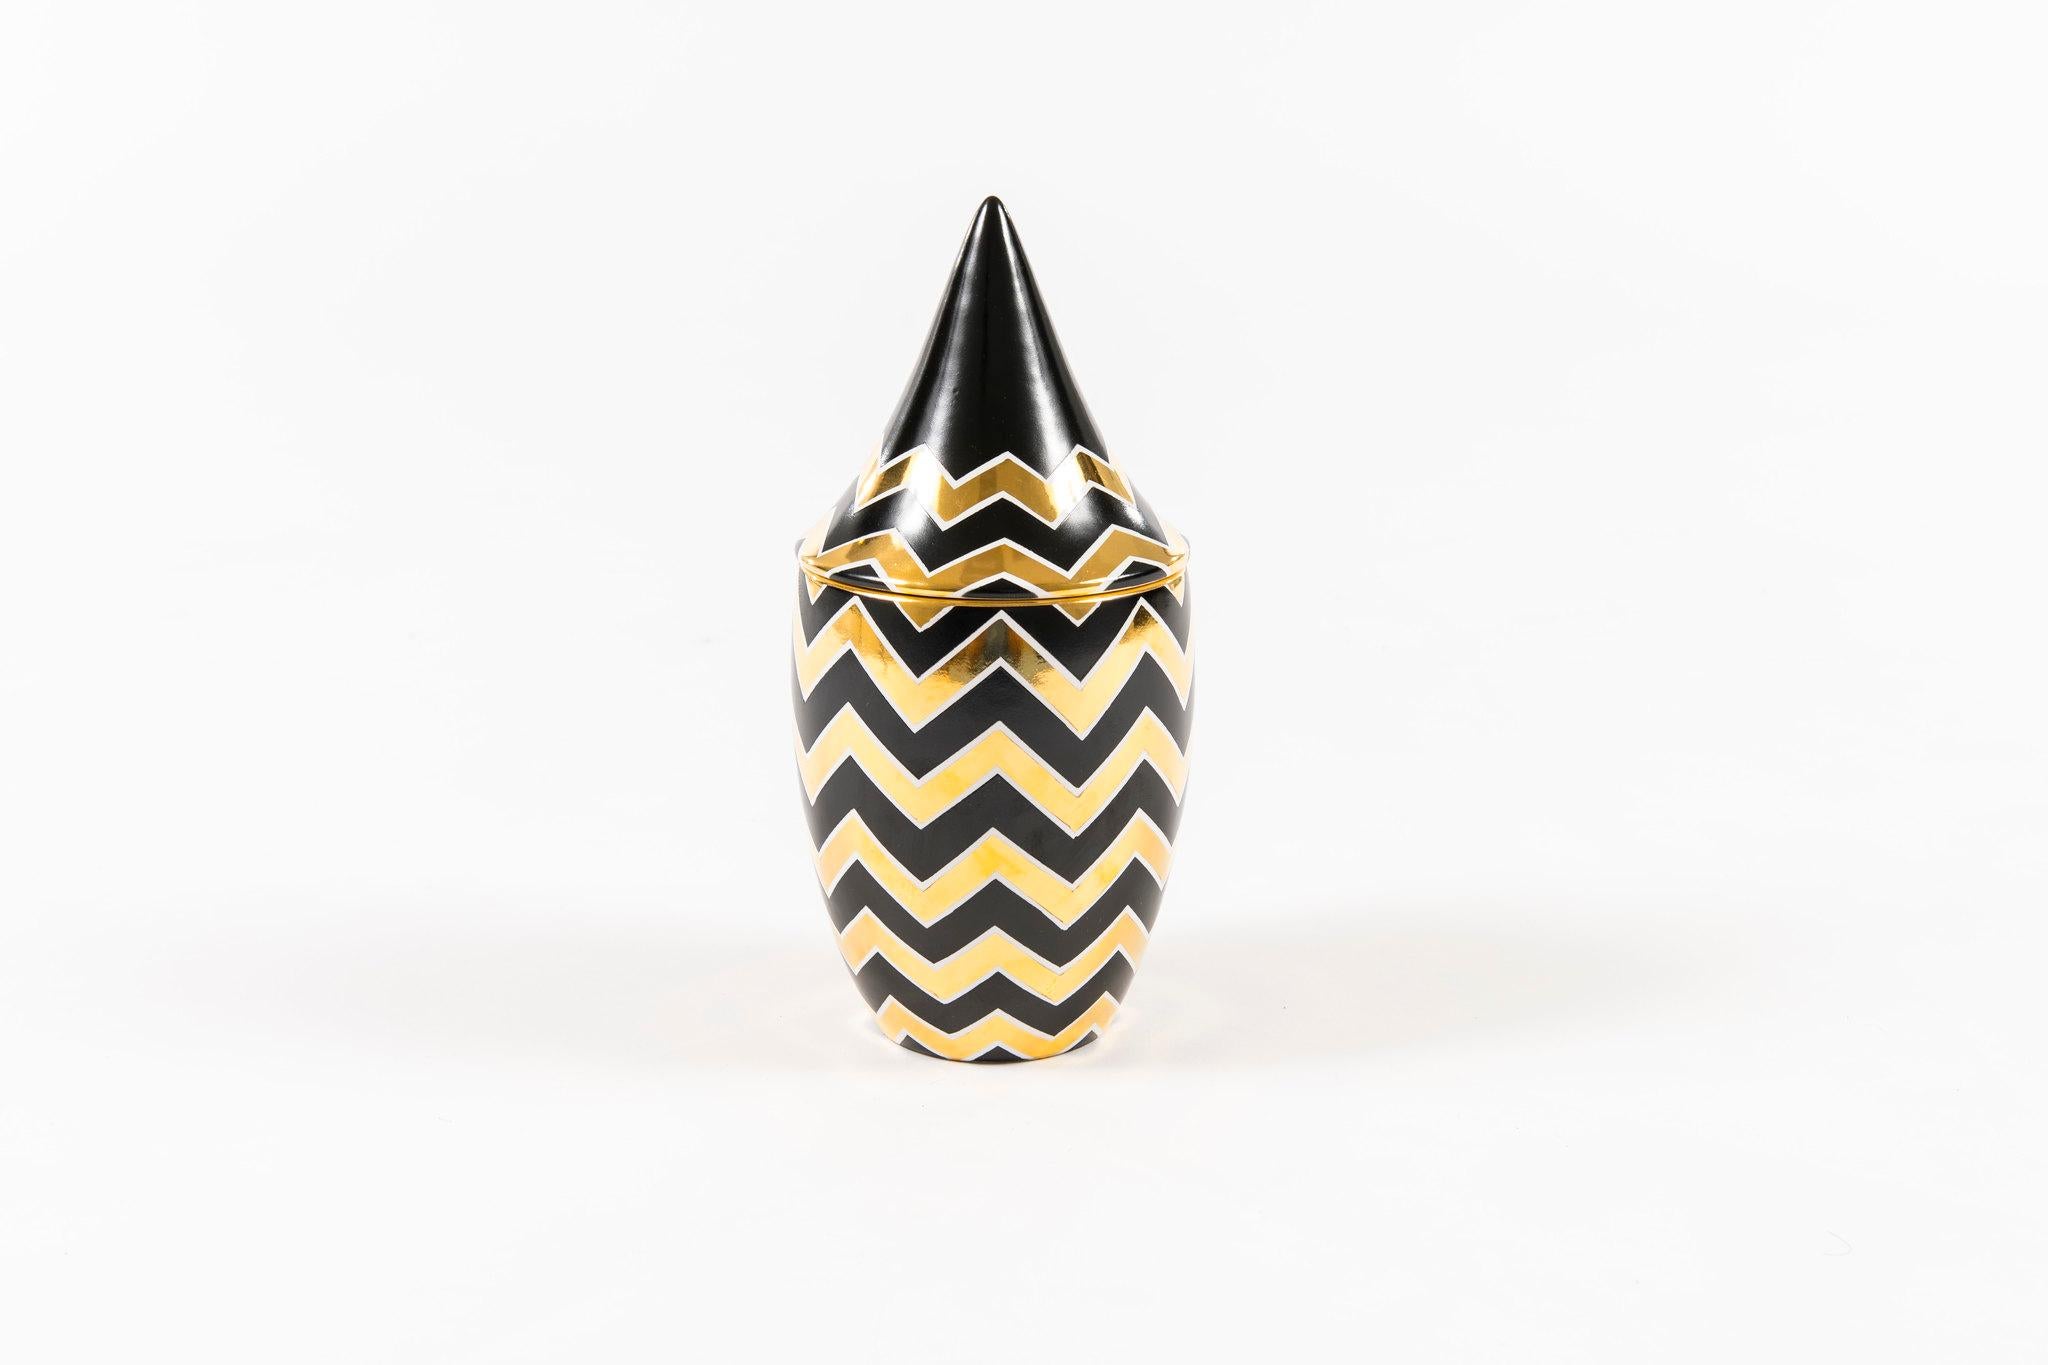 A decorative black and gold ceramic lidded jar. A lovely catchall jar and can double as a contemporary vase.

Waylande Gregory Studios was founded by Gregory’s great-grandnephew, Bryan Downey, and fashion entrepreneur Mickey Rosarin. The Studios